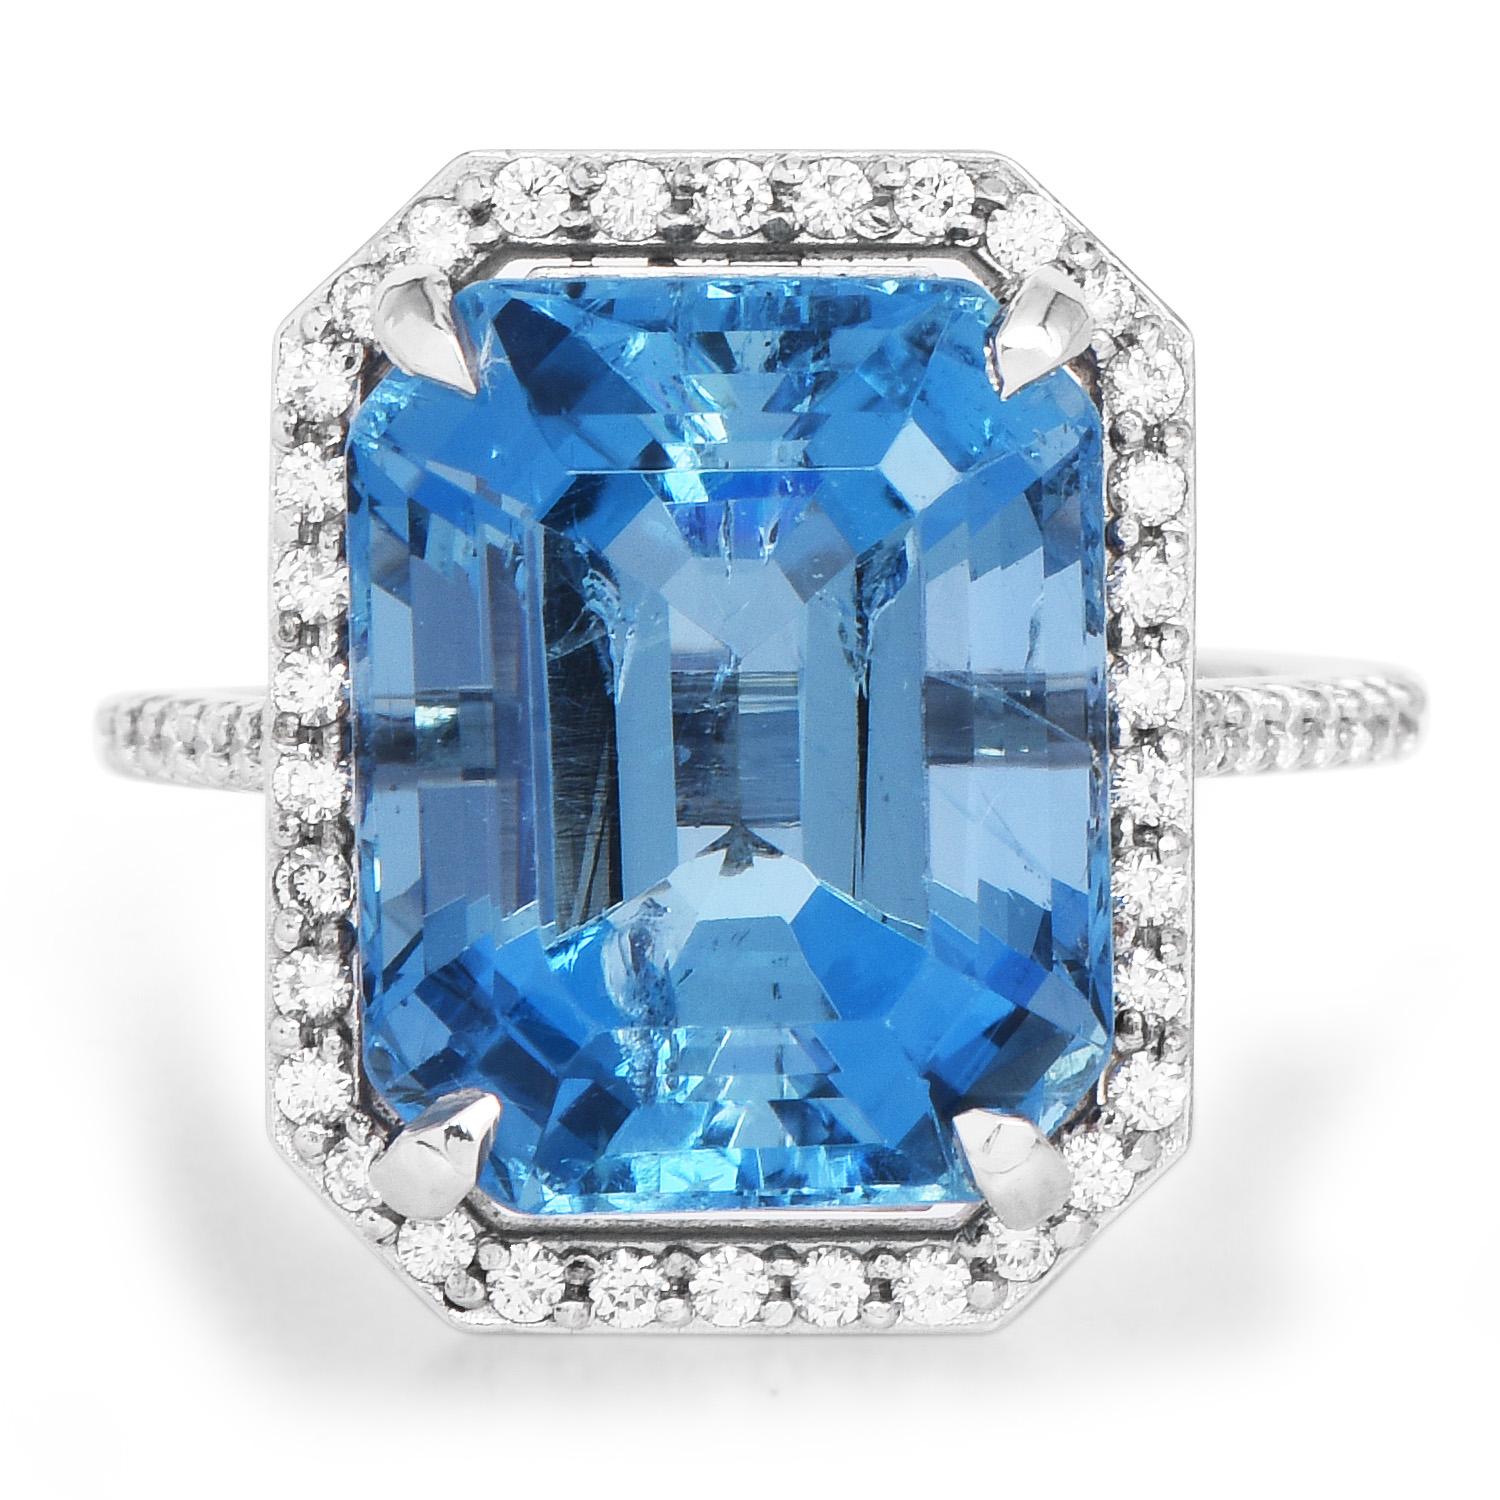 This exquisite cocktail ring has a halo style design,

and it is crafted in solid Platinum.

Prominently featured in the center is a GIA certified 9.83 carats, octagonal step cut, extremely High-Quality deep blue genuine Aquamarine, 

Surrounded by